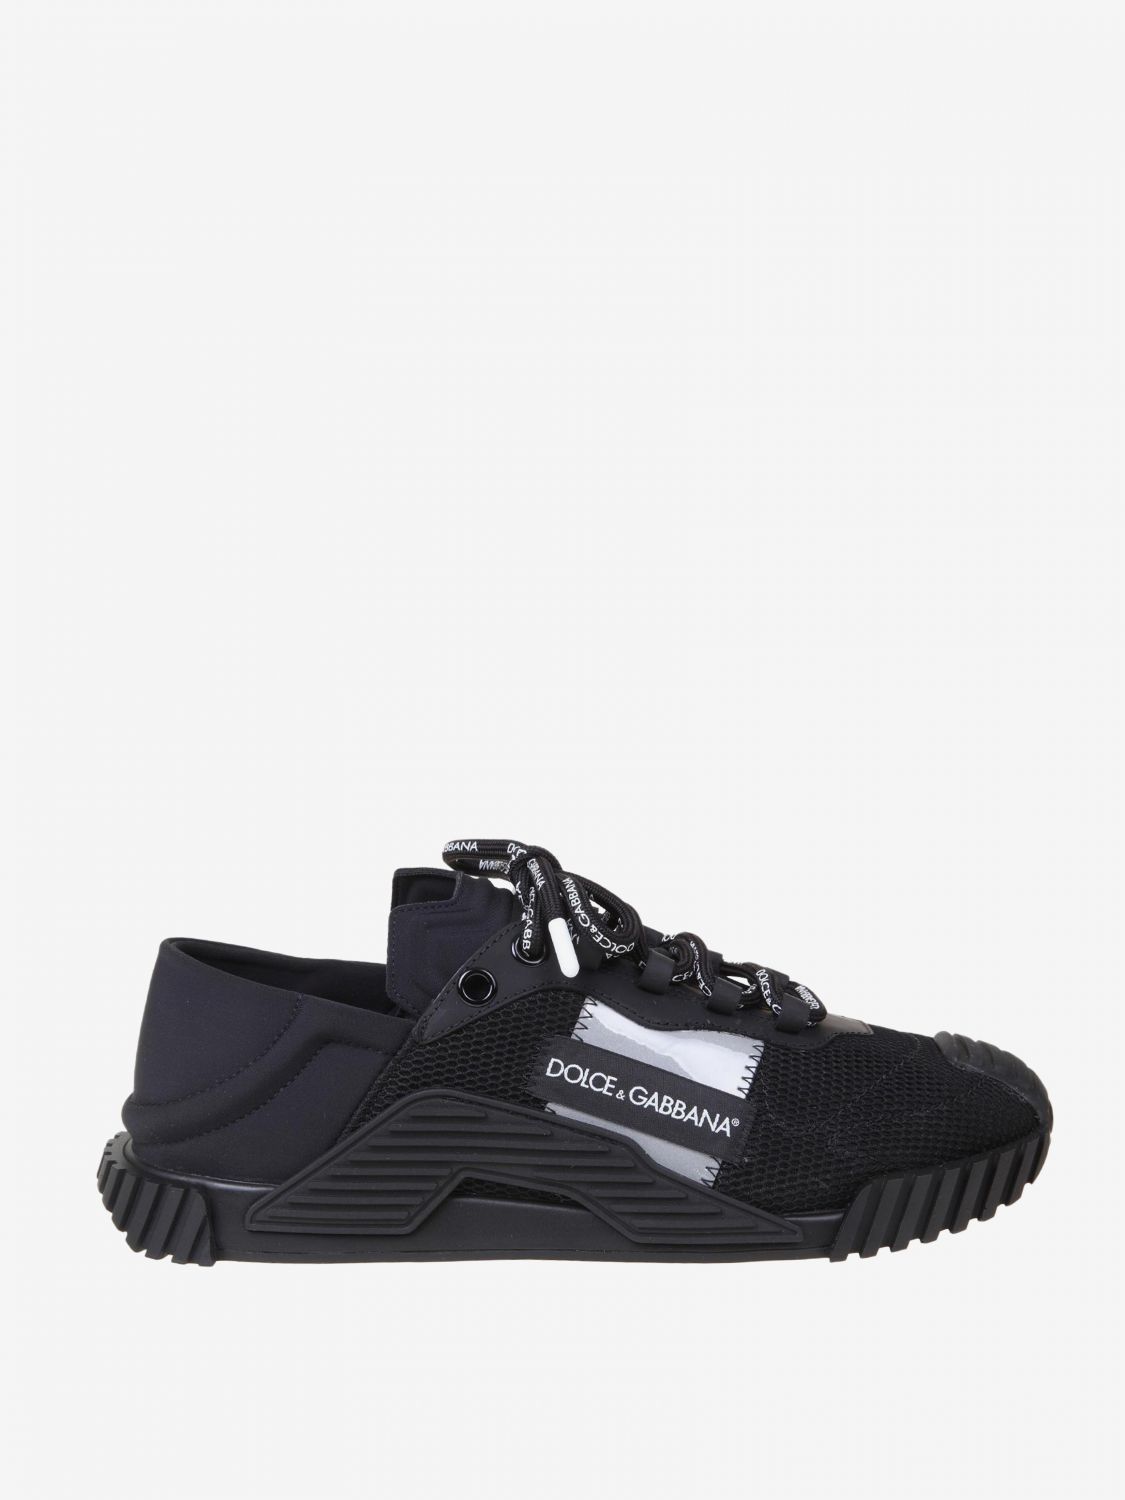 dolce and gabbana sneakers mens